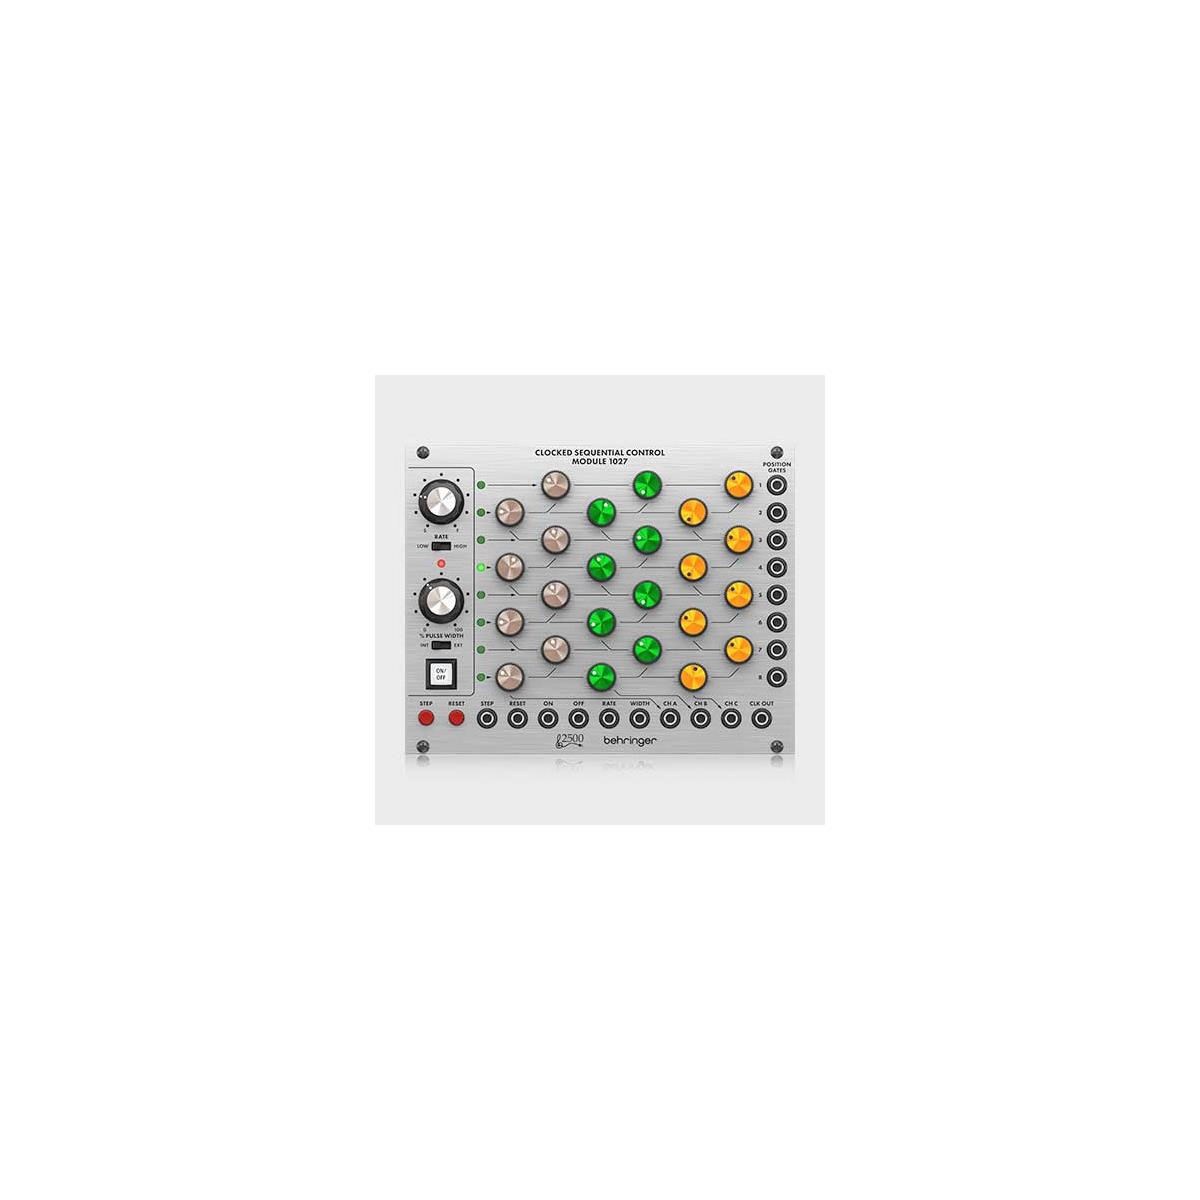 Image of Behringer Legendary 2500 1027 Clocked Sequential Control Module Sequencer Module